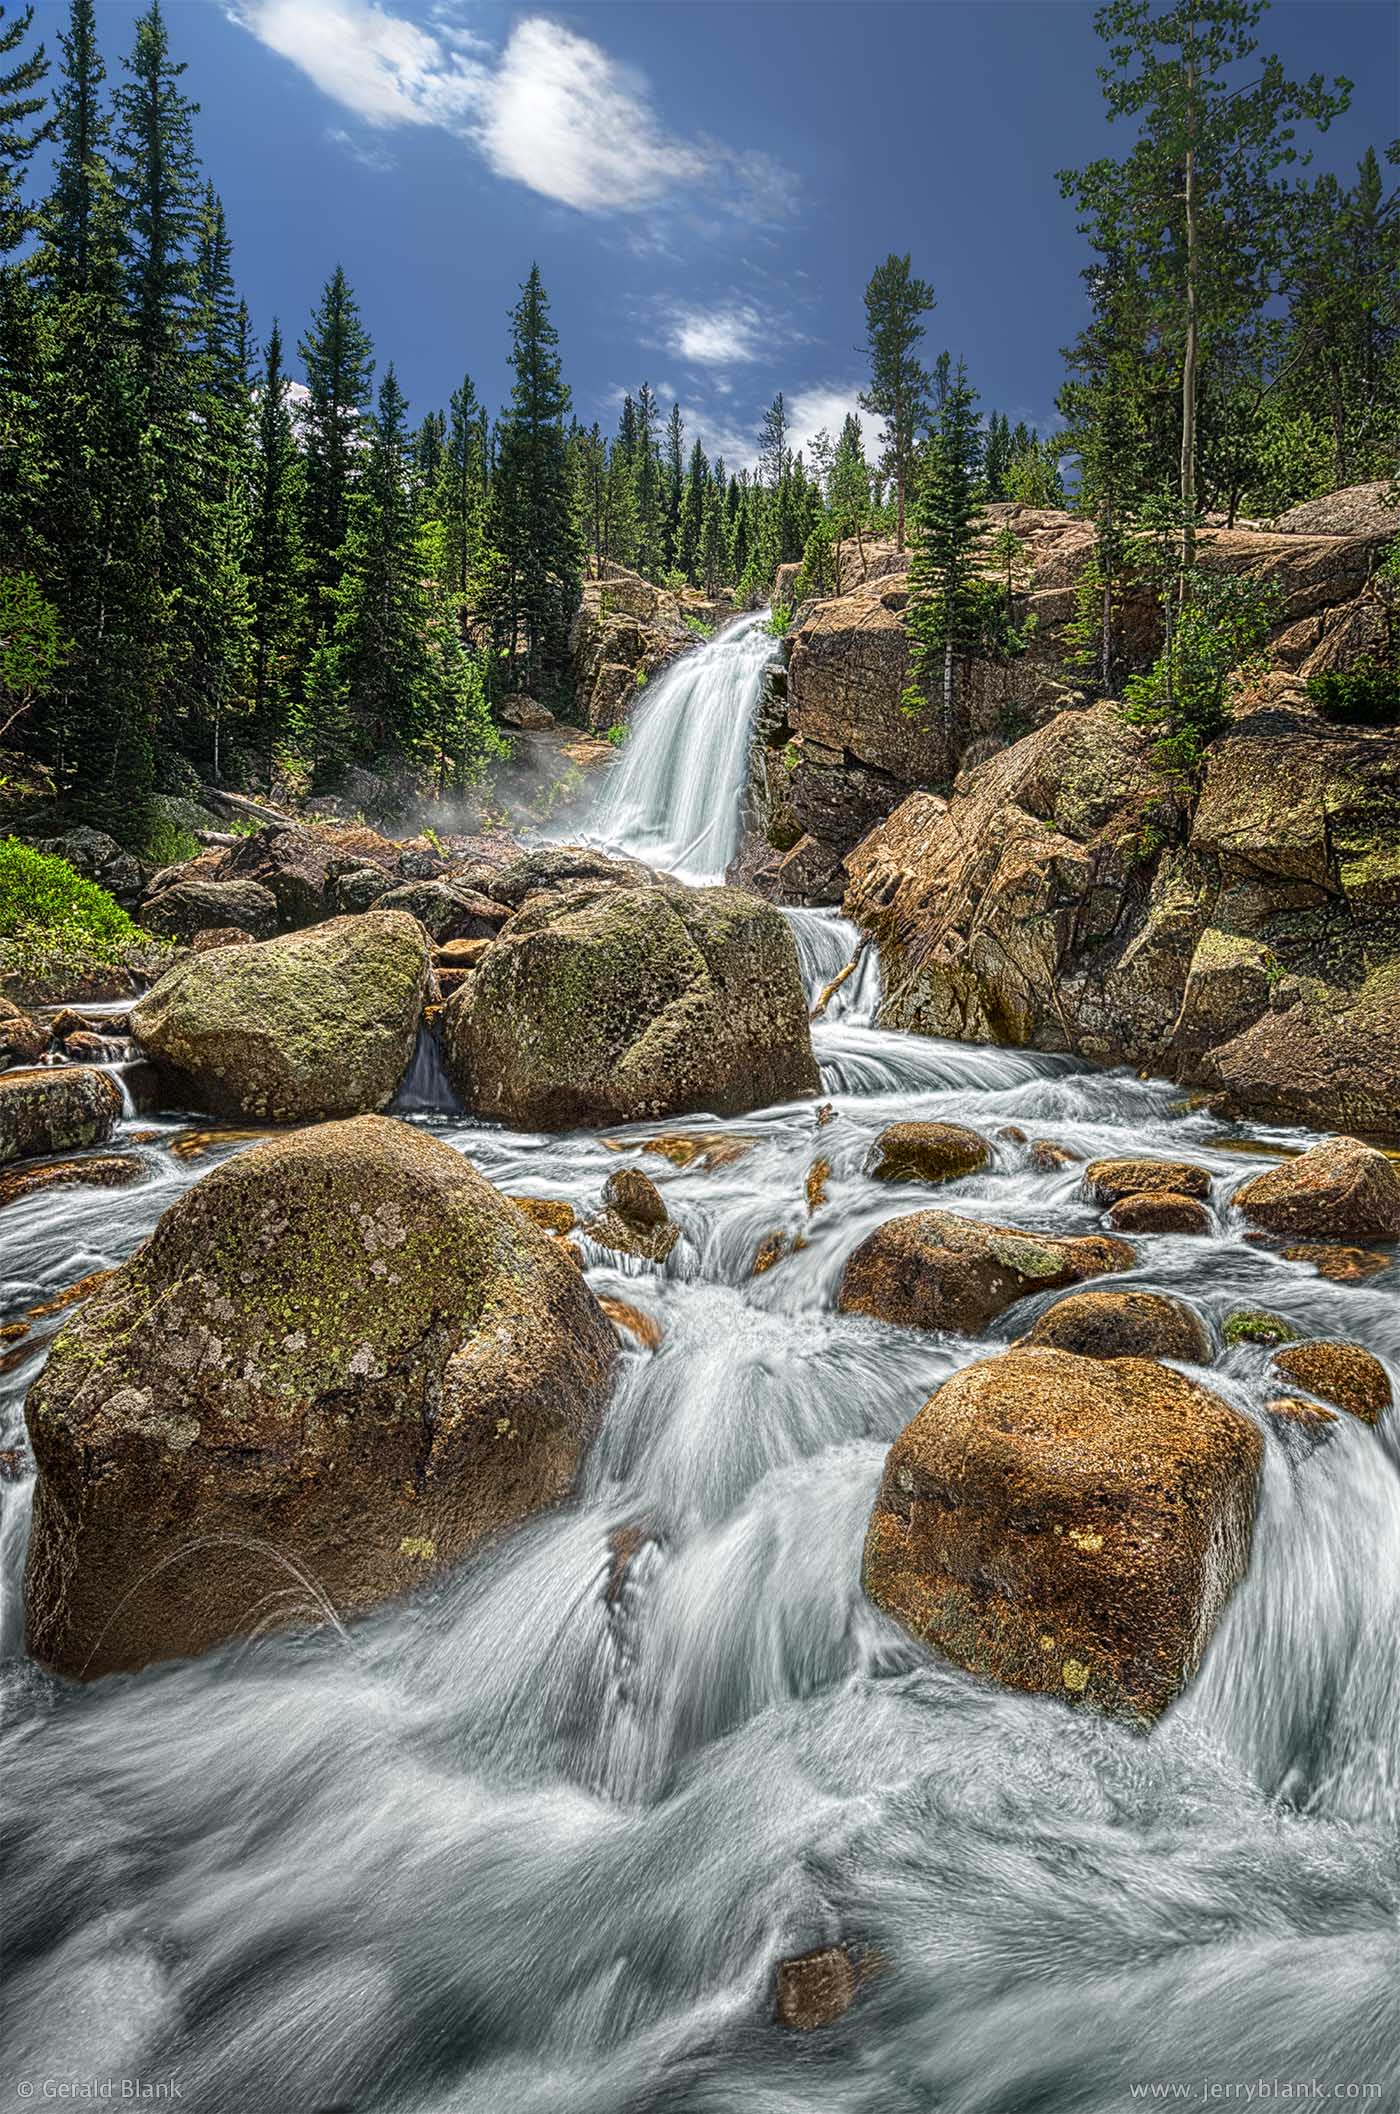 #22607 - Alberta Falls in Glacier Gorge, Rocky Mountain National Park, Colorado - photo by Jerry Blank